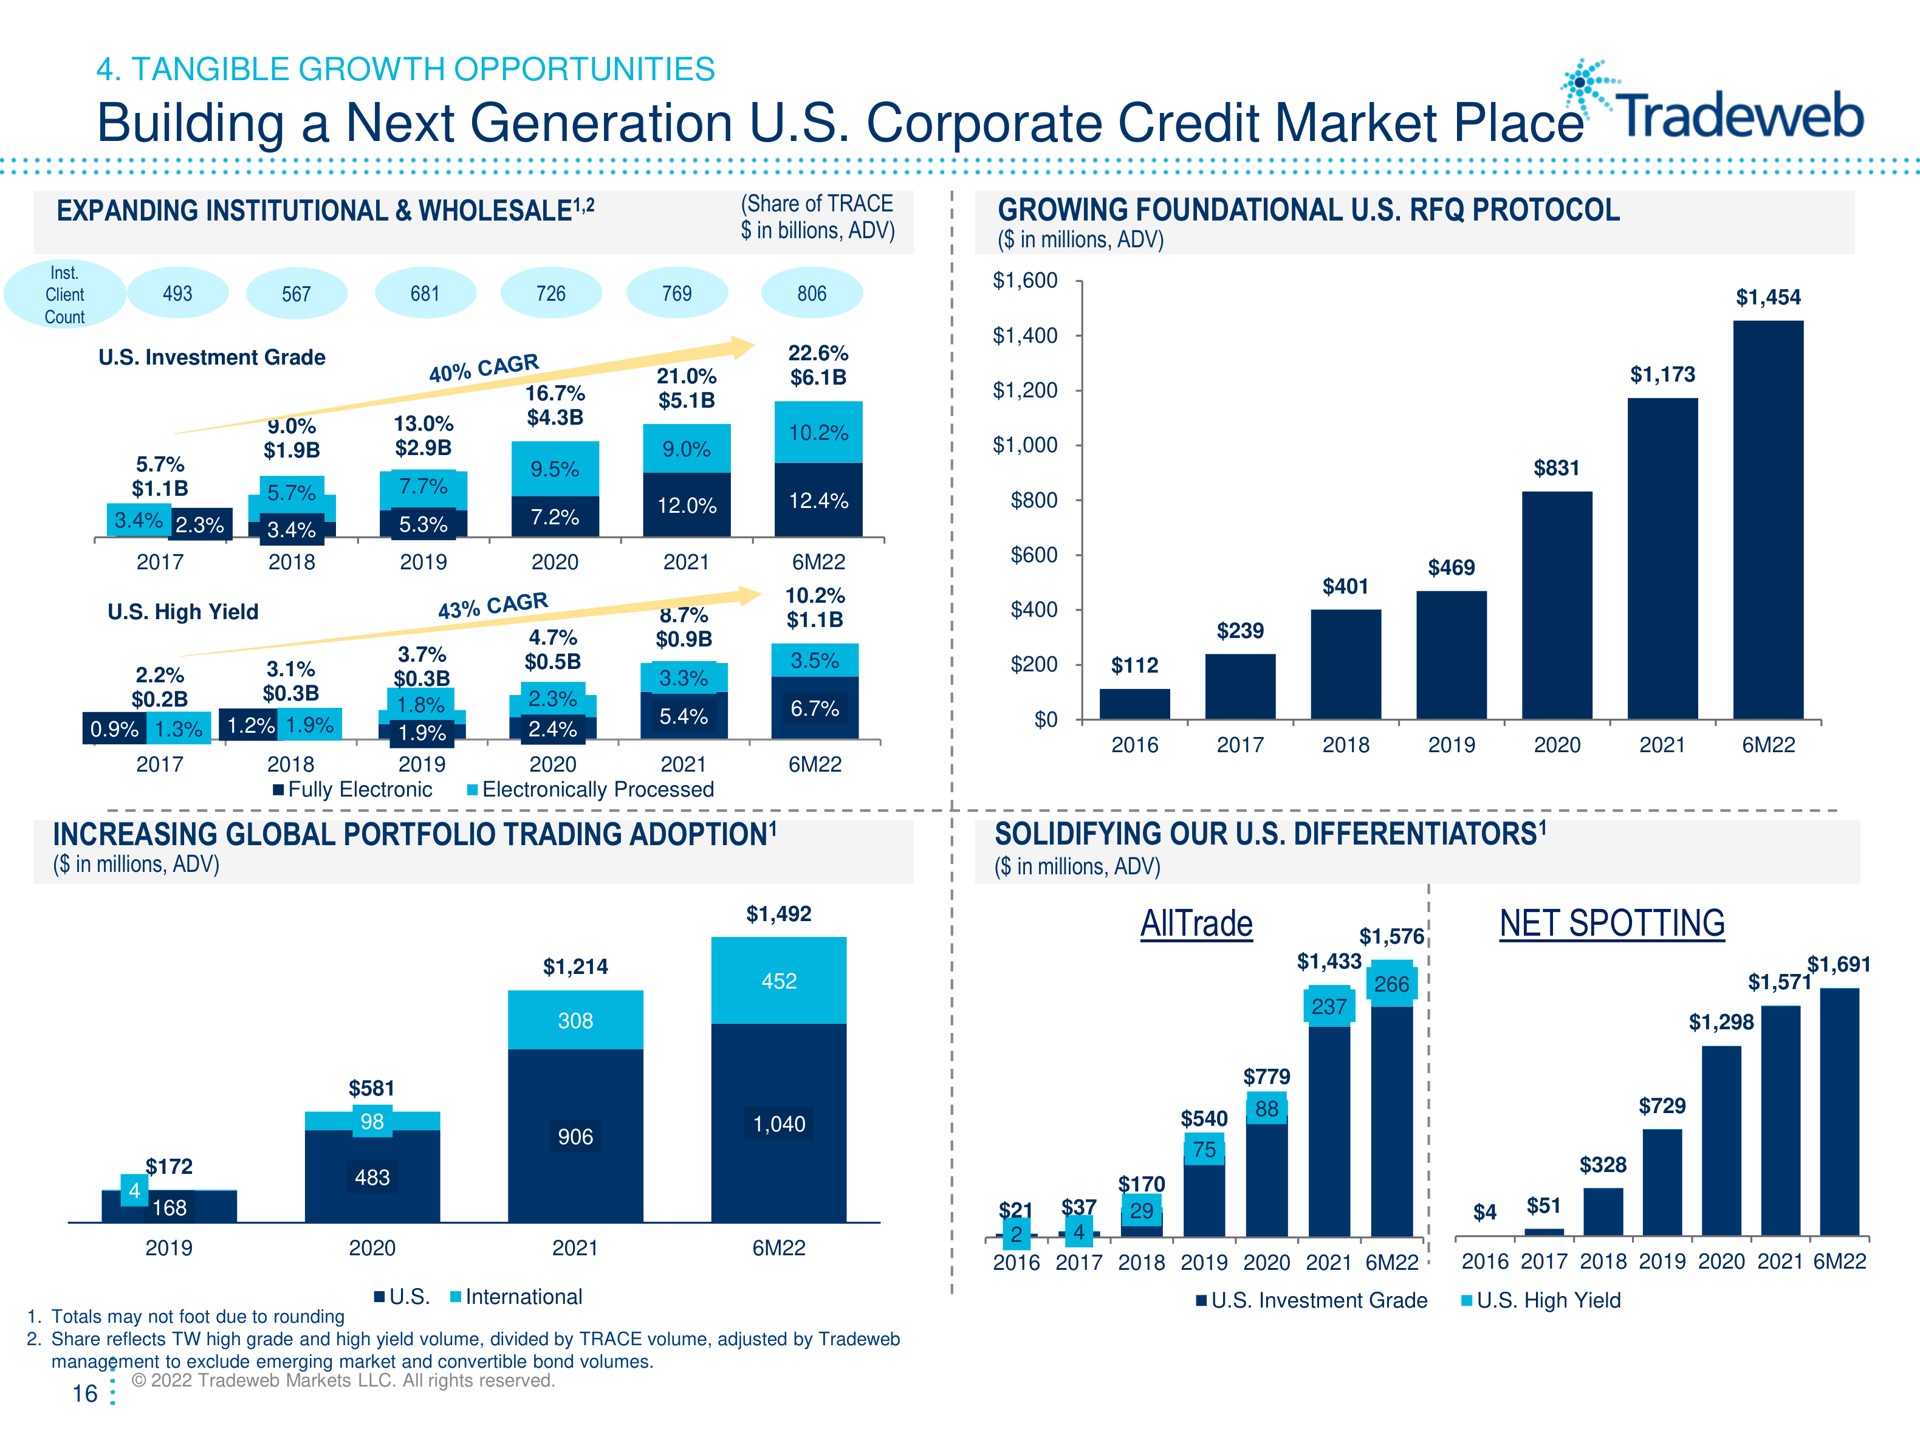 building a next generation corporate credit market place net spotting expanding institutional wholesale share of trace tangible growth opportunities growing foundational protocol lam i high yield increasing global portfolio trading adoption solidifying our differentiators | Tradeweb